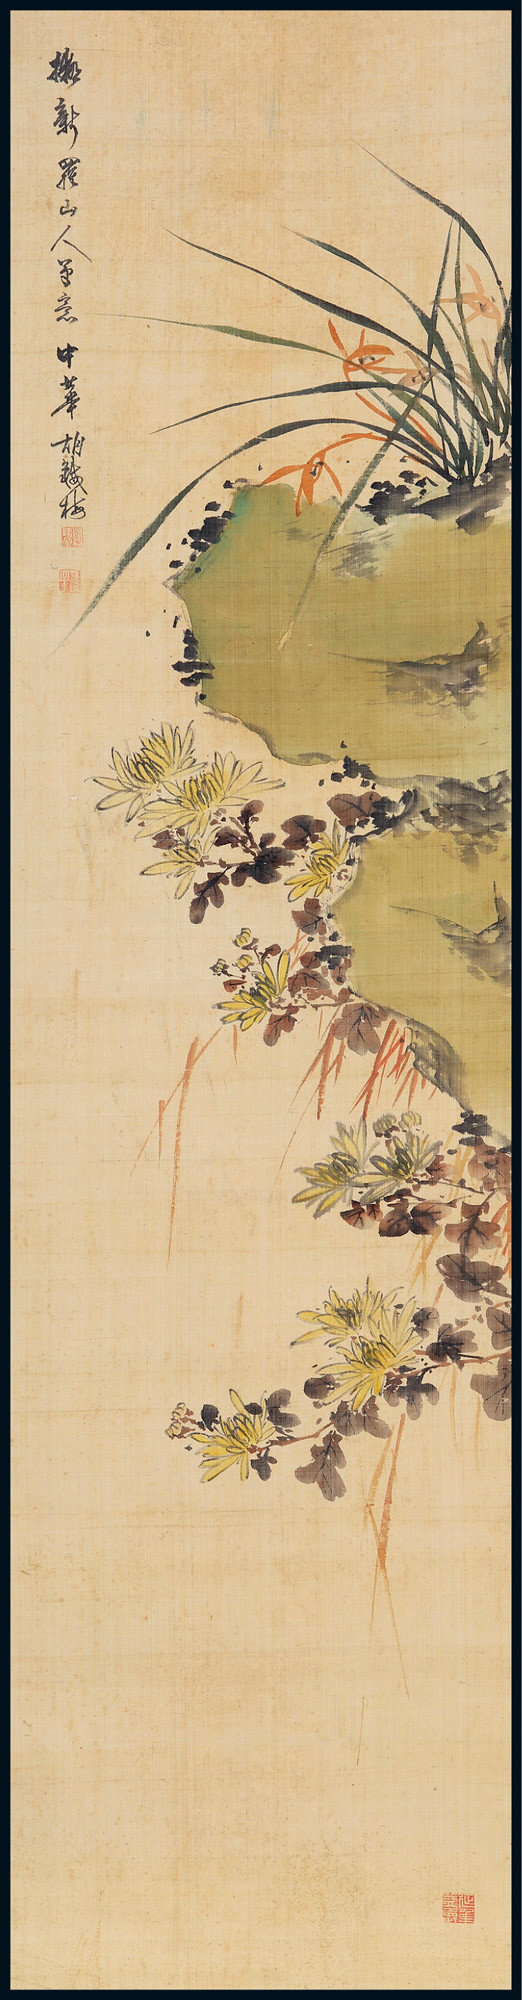 The Orchid and Rocks Picture on silk drawn by Hu Tiemei